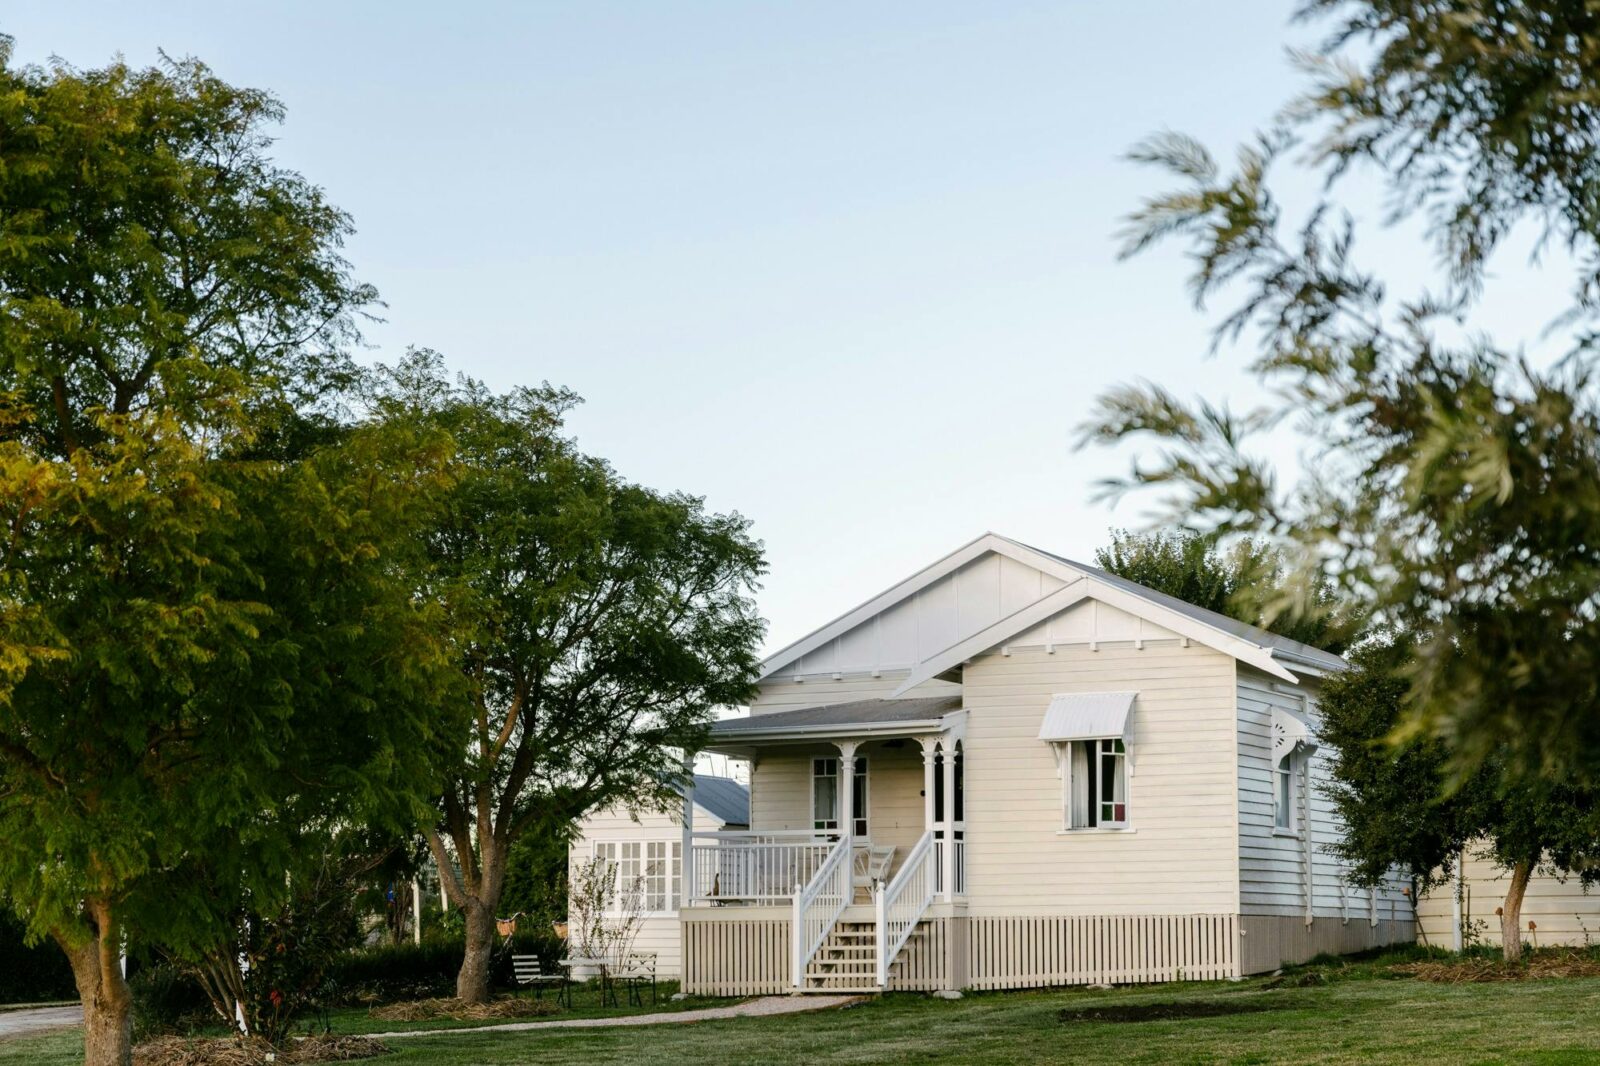 Front of The Nesting Post, a quaint 1929 restored Queenslander timber workers cottage with veranda.